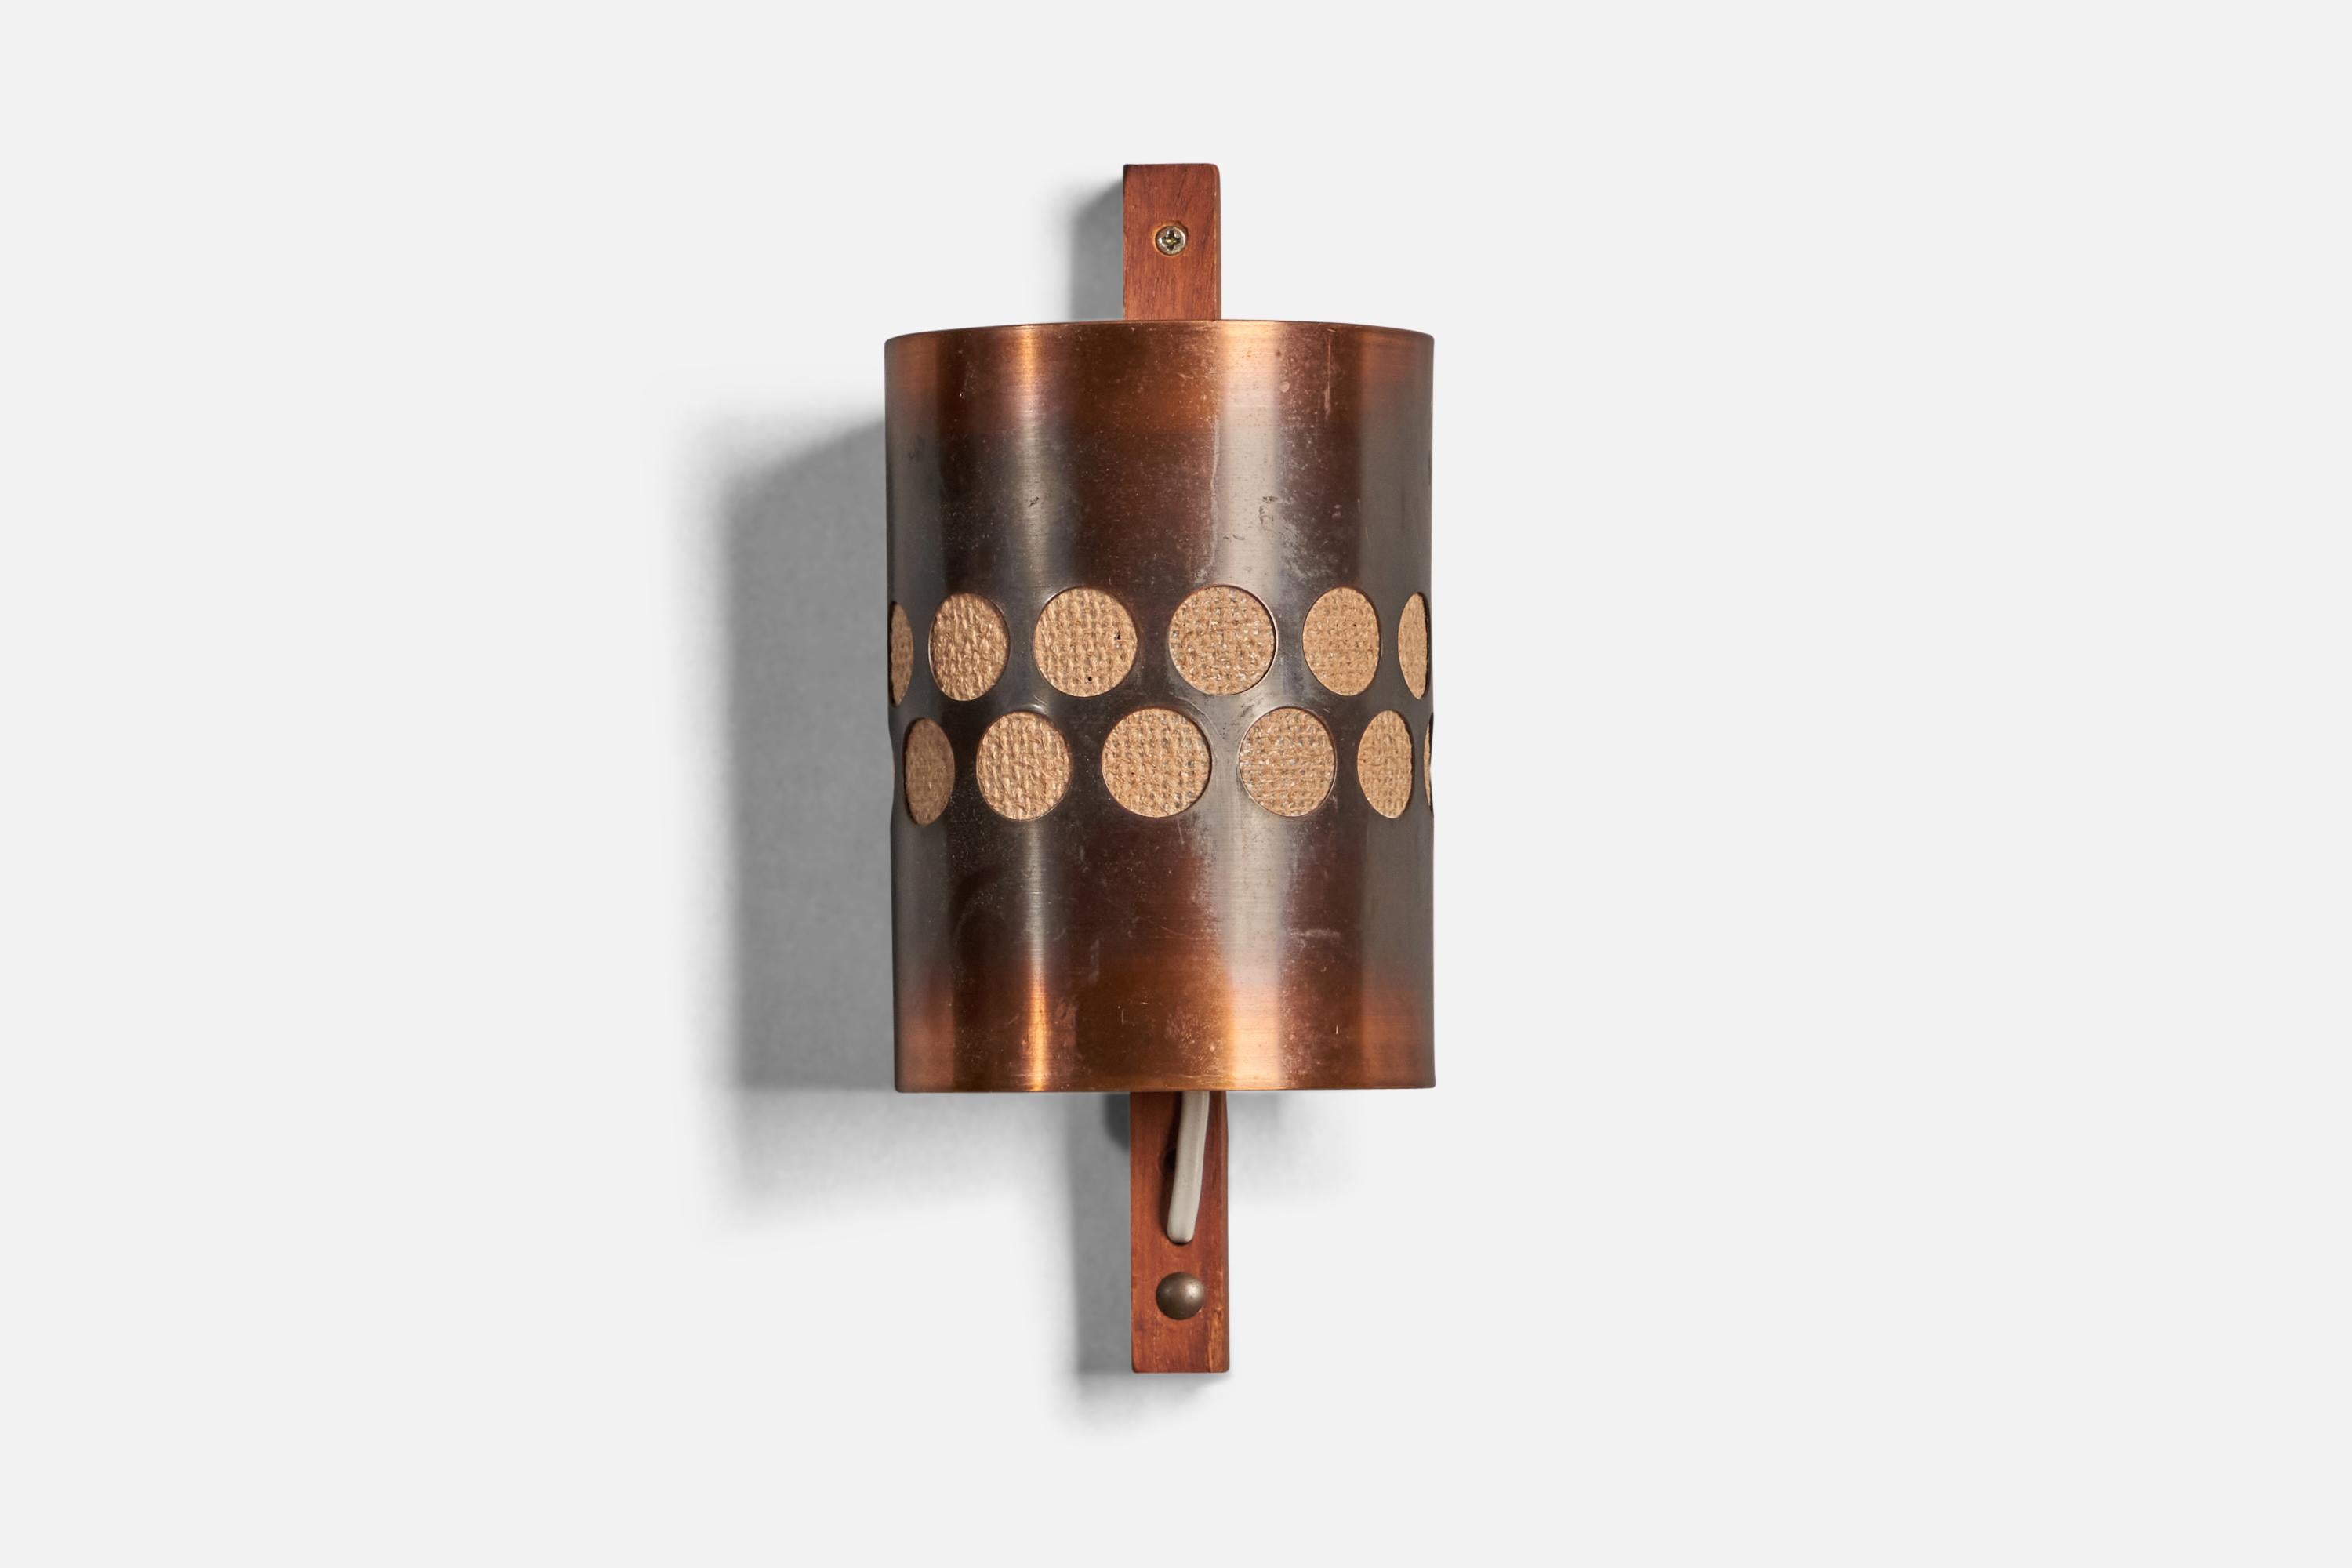 A burnished copper, raffia and stained oak wall light designed and produced by Nils Ledung, Sweden, c. 1960s.

Overall Dimensions (inches): 10” H x 4.4” W x 4.5” D
Bulb Specifications: E-14 Bulb
Number of Sockets: 1